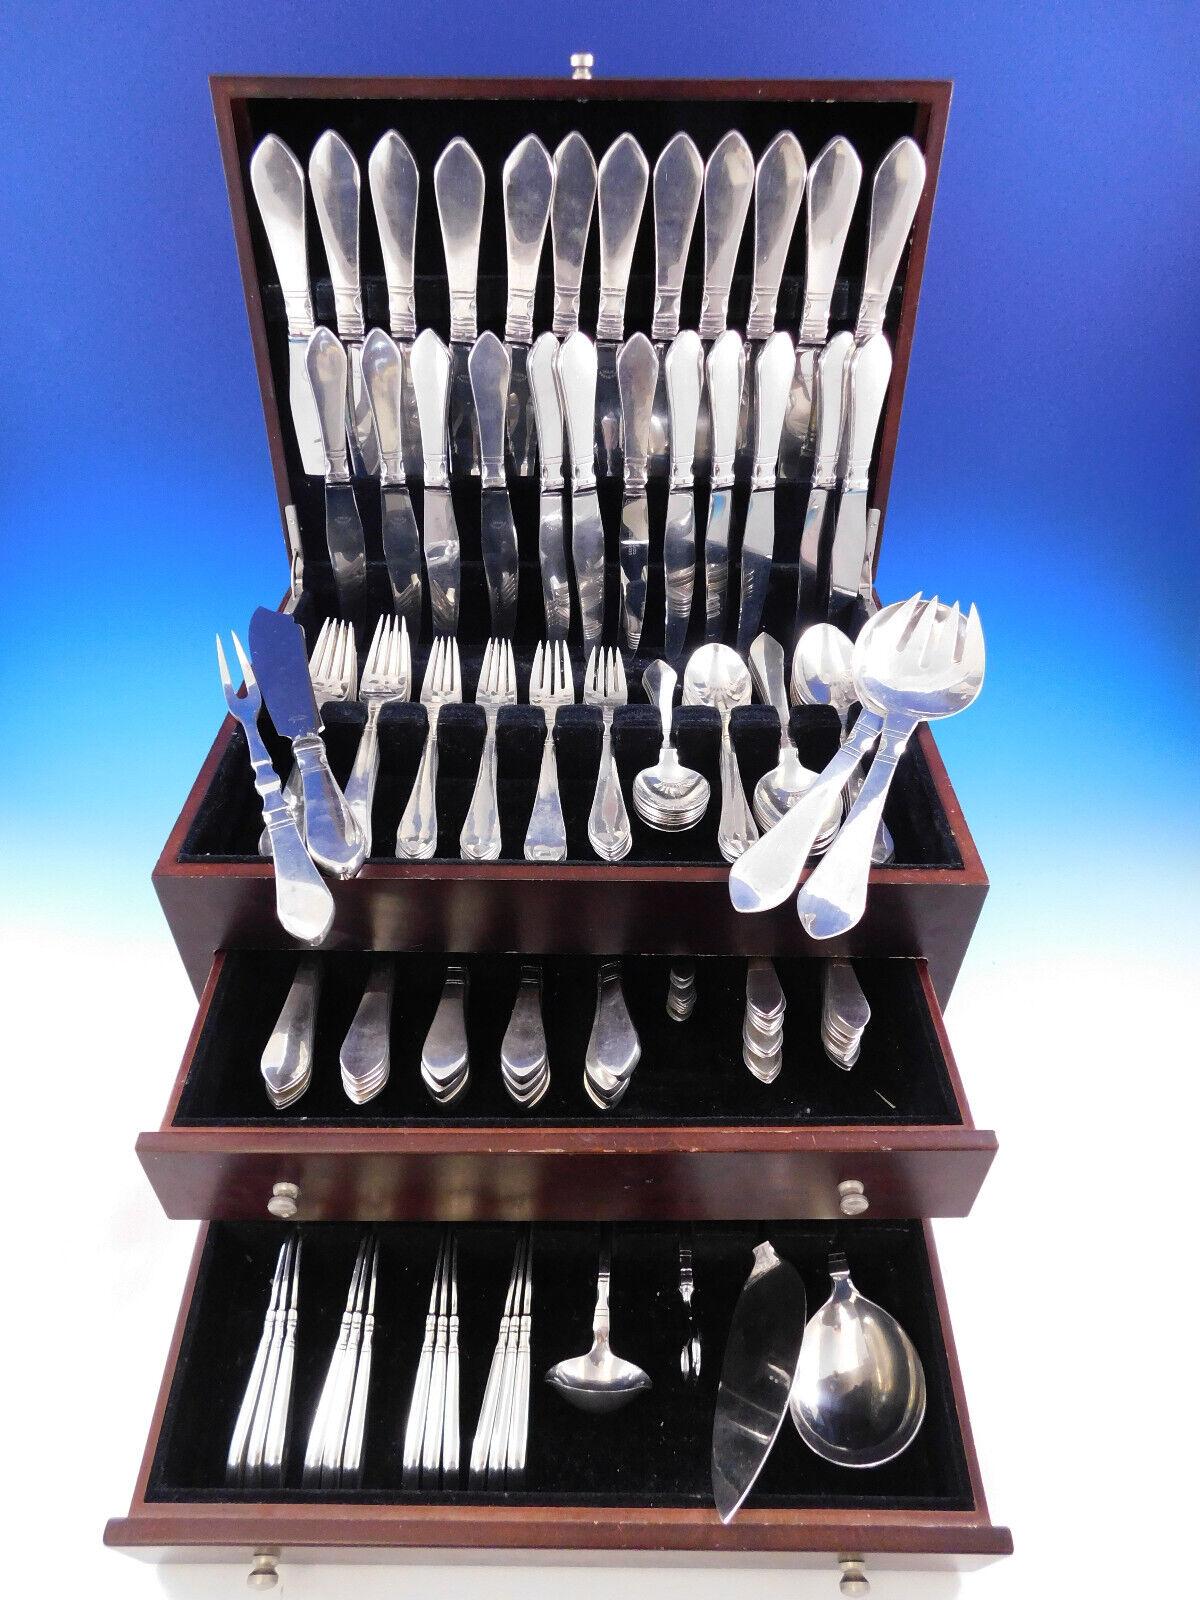 esigned in 1906 by Georg Jensen, the Continental cutlery pattern was the first major cutlery range to emerge from the fledgling silversmithy that was established two years earlier in 1904. In designing Continental, Georg Jensen was inspired by the